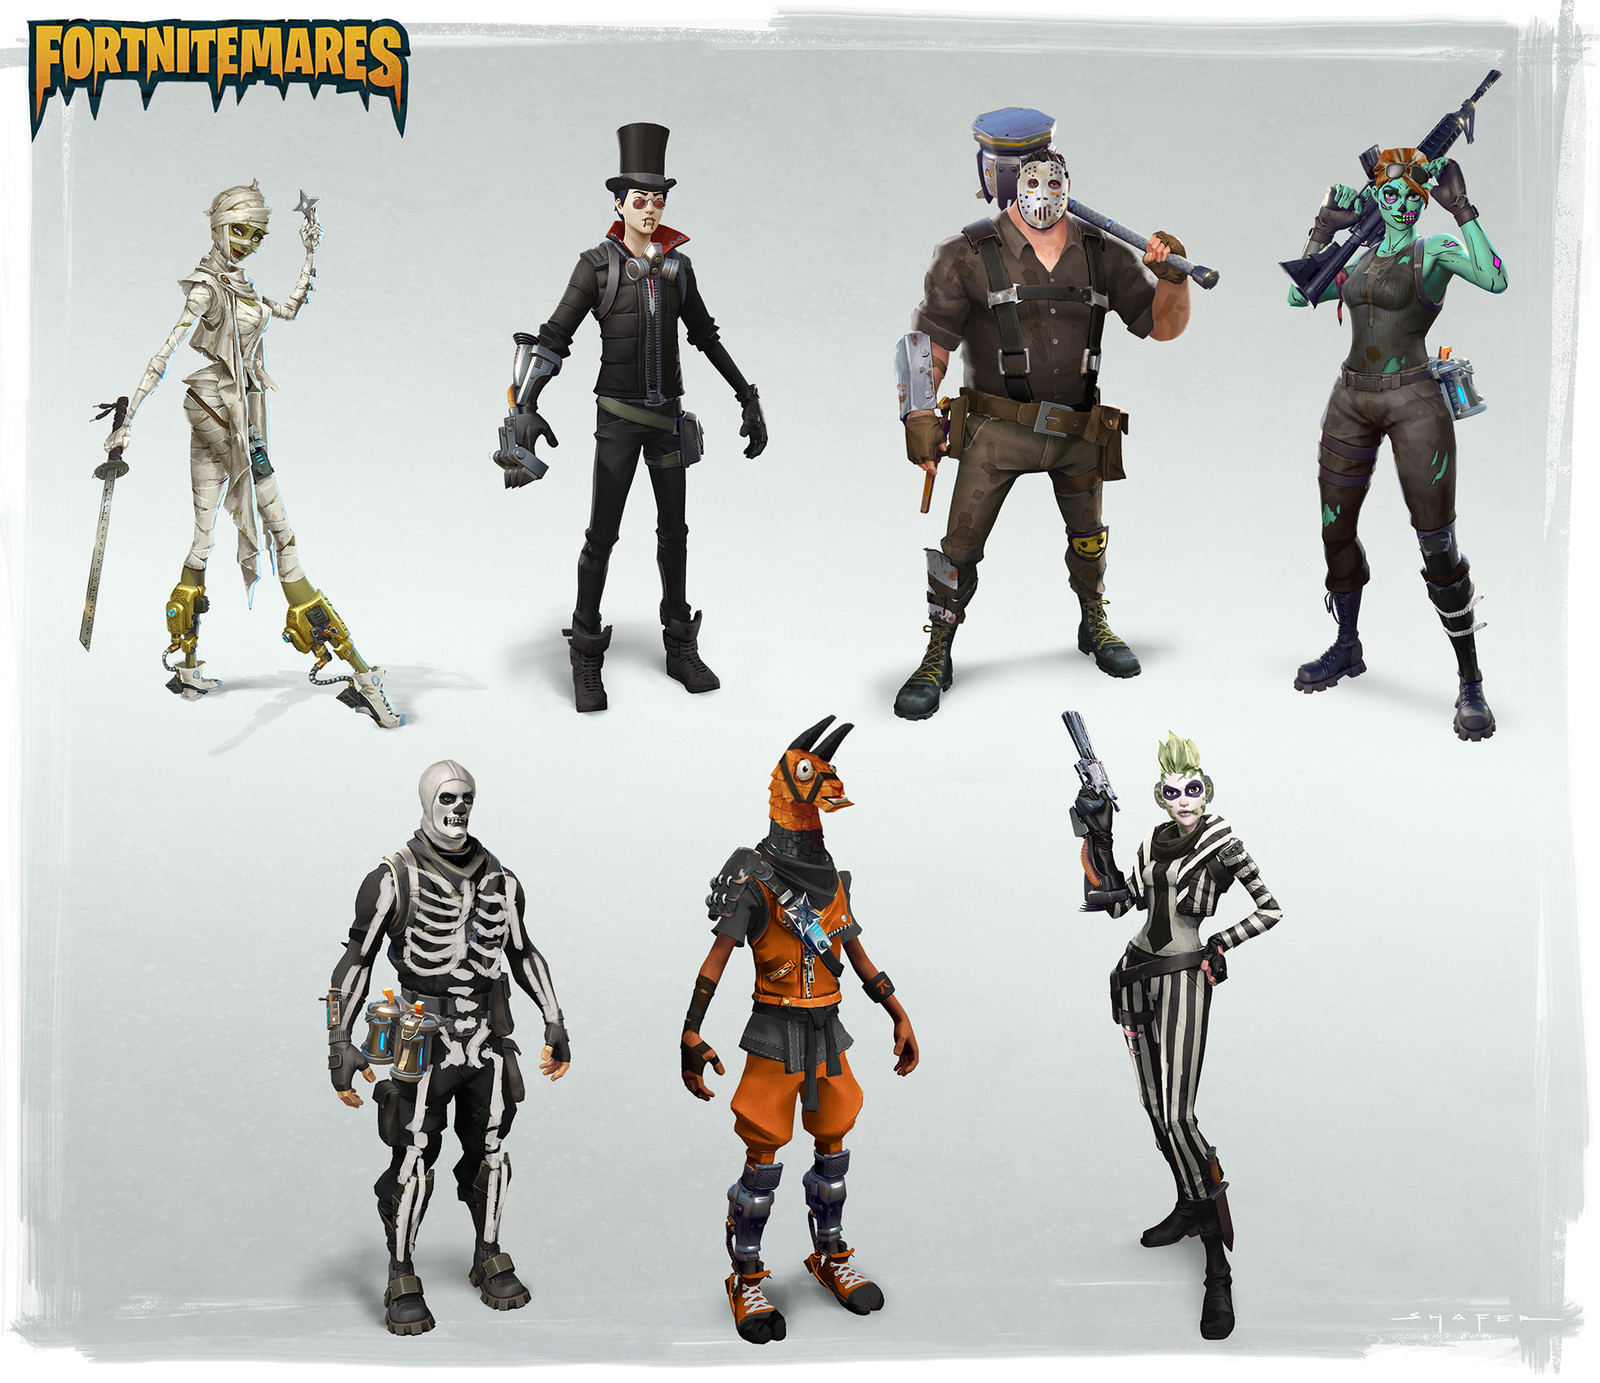 Halloween skin concepts for Save the World and a couple of them were in Battle Royale as well.